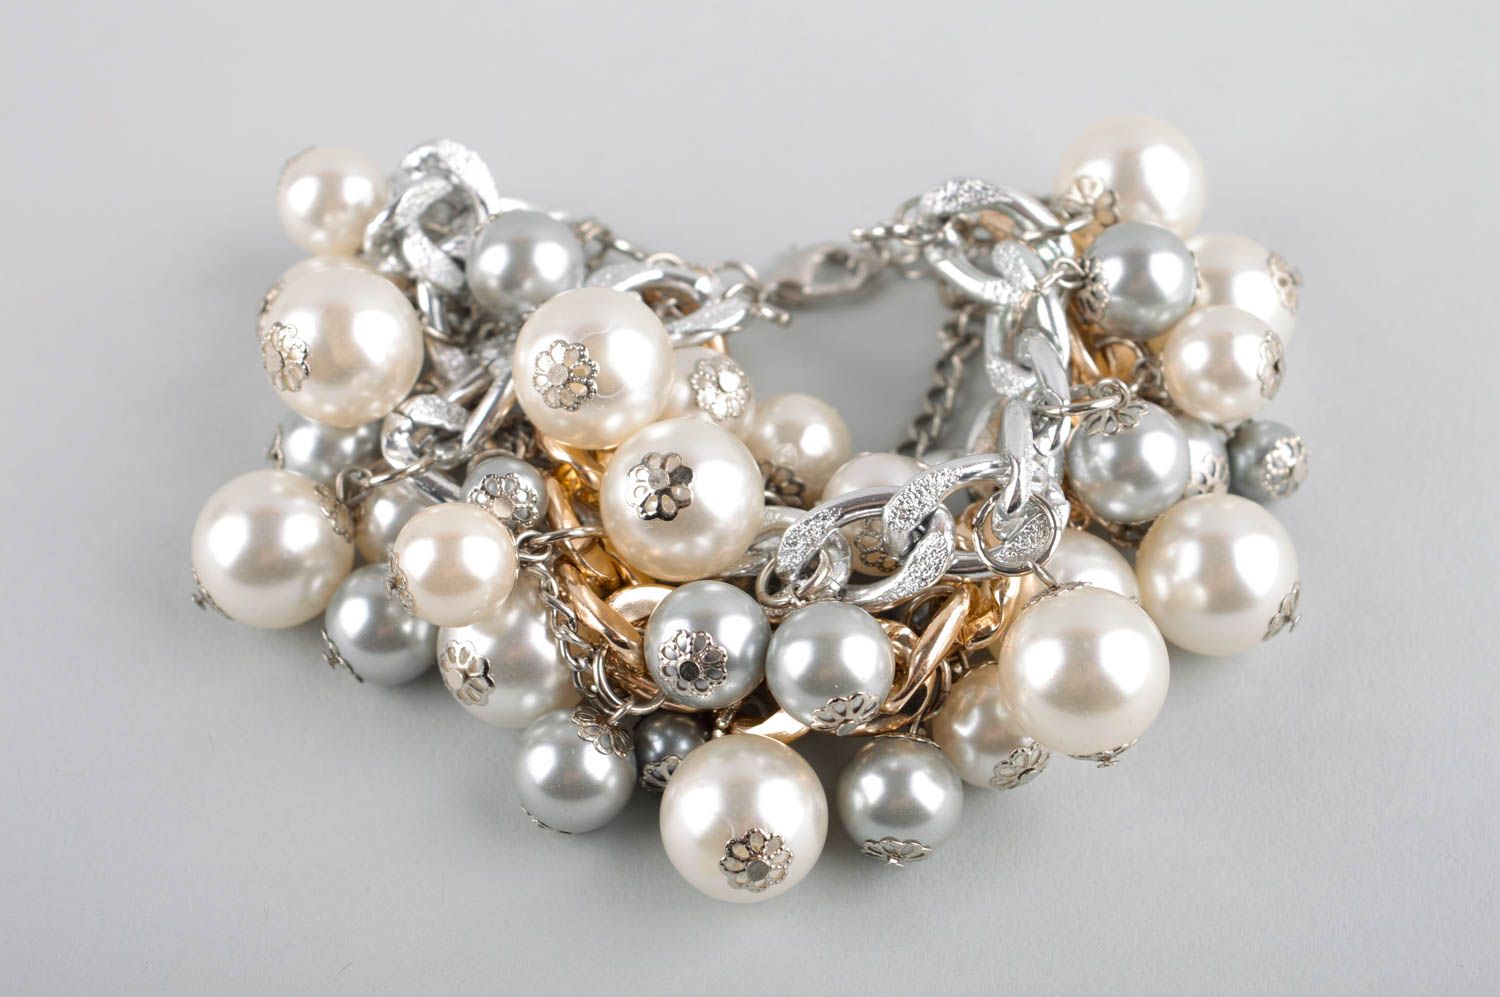 Handmade accessories beautiful bracelet with artificial pearls design jewelry photo 2